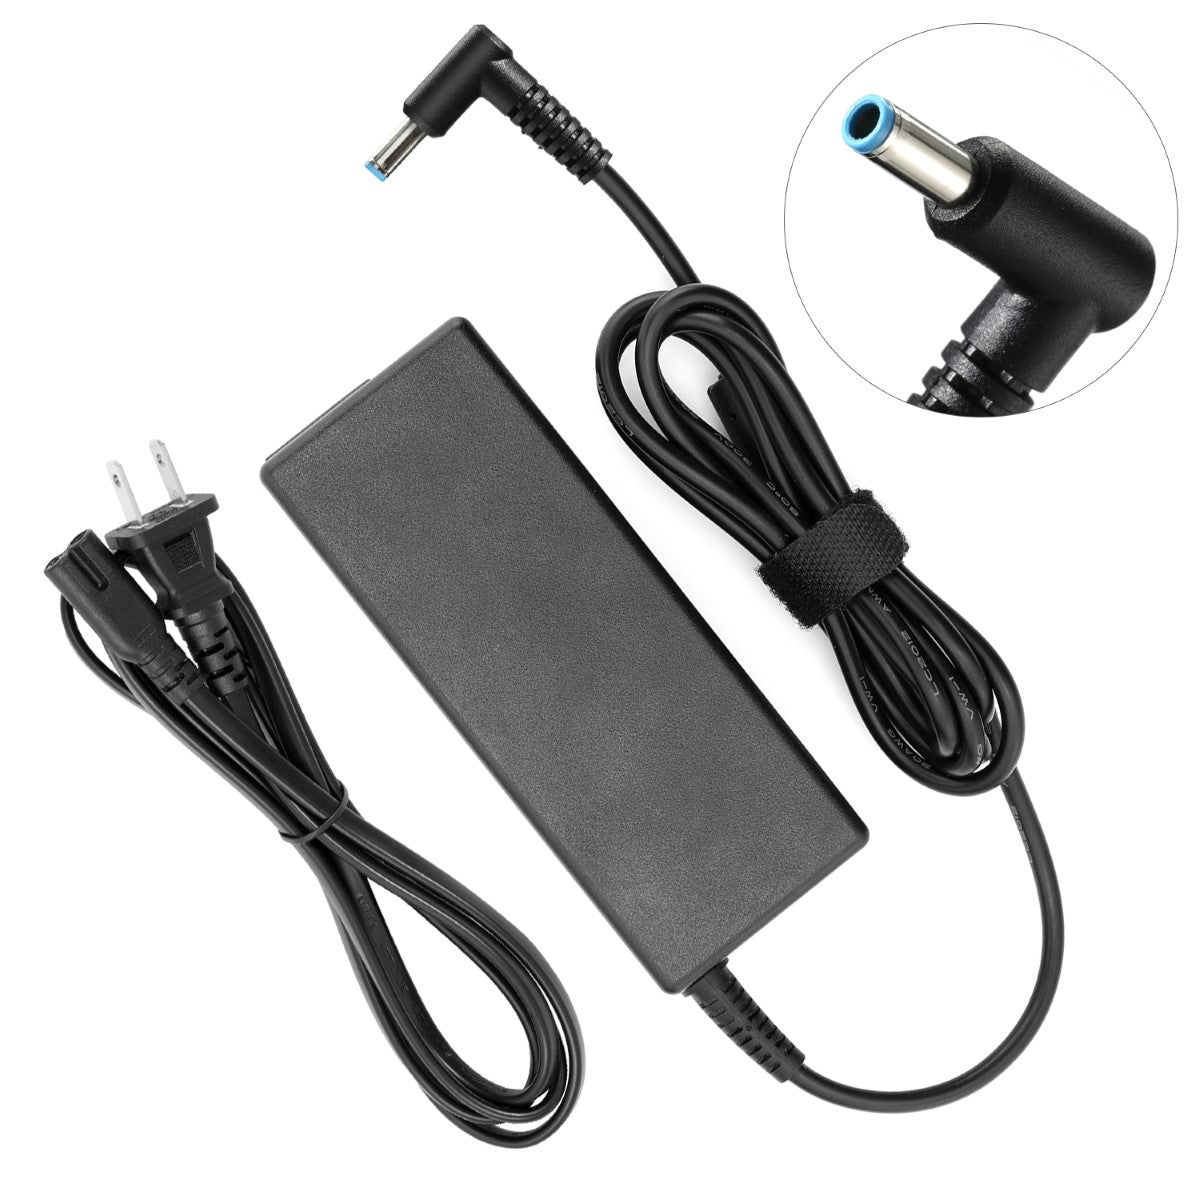 AC Adapter Charger for HP Envy Touchsmart 17-j070ca Notebook.